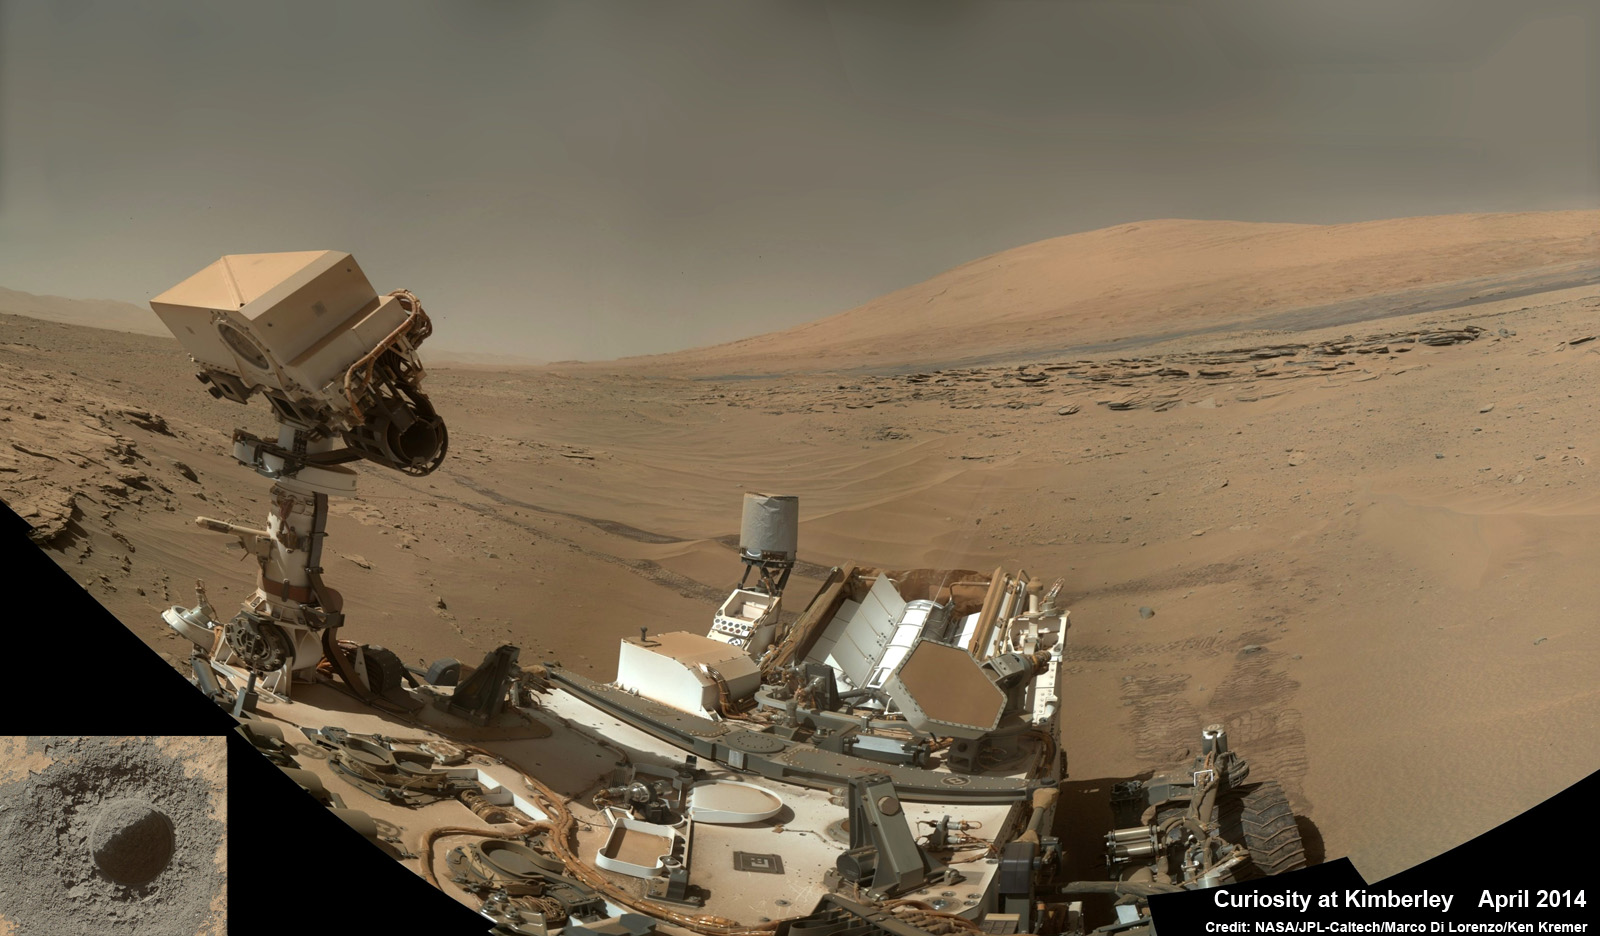 Curiosity snaps a new selfie at Kimberley waypoint with towering Mount Sharp backdrop on April 27, 2014 (Sol 613). Inset shows MAHLI camera image of rovers mini-drill test operation on April 29, 2014 (Sol 615) into “Windjama” rock target at Mount Remarkable butte.  MAHLI color photo mosaic assembled from raw images snapped on Sol 613, April 27, 2014. Credit: NASA/JPL/MSSS/Marco Di Lorenzo/Ken Kremer - kenkremer.com 